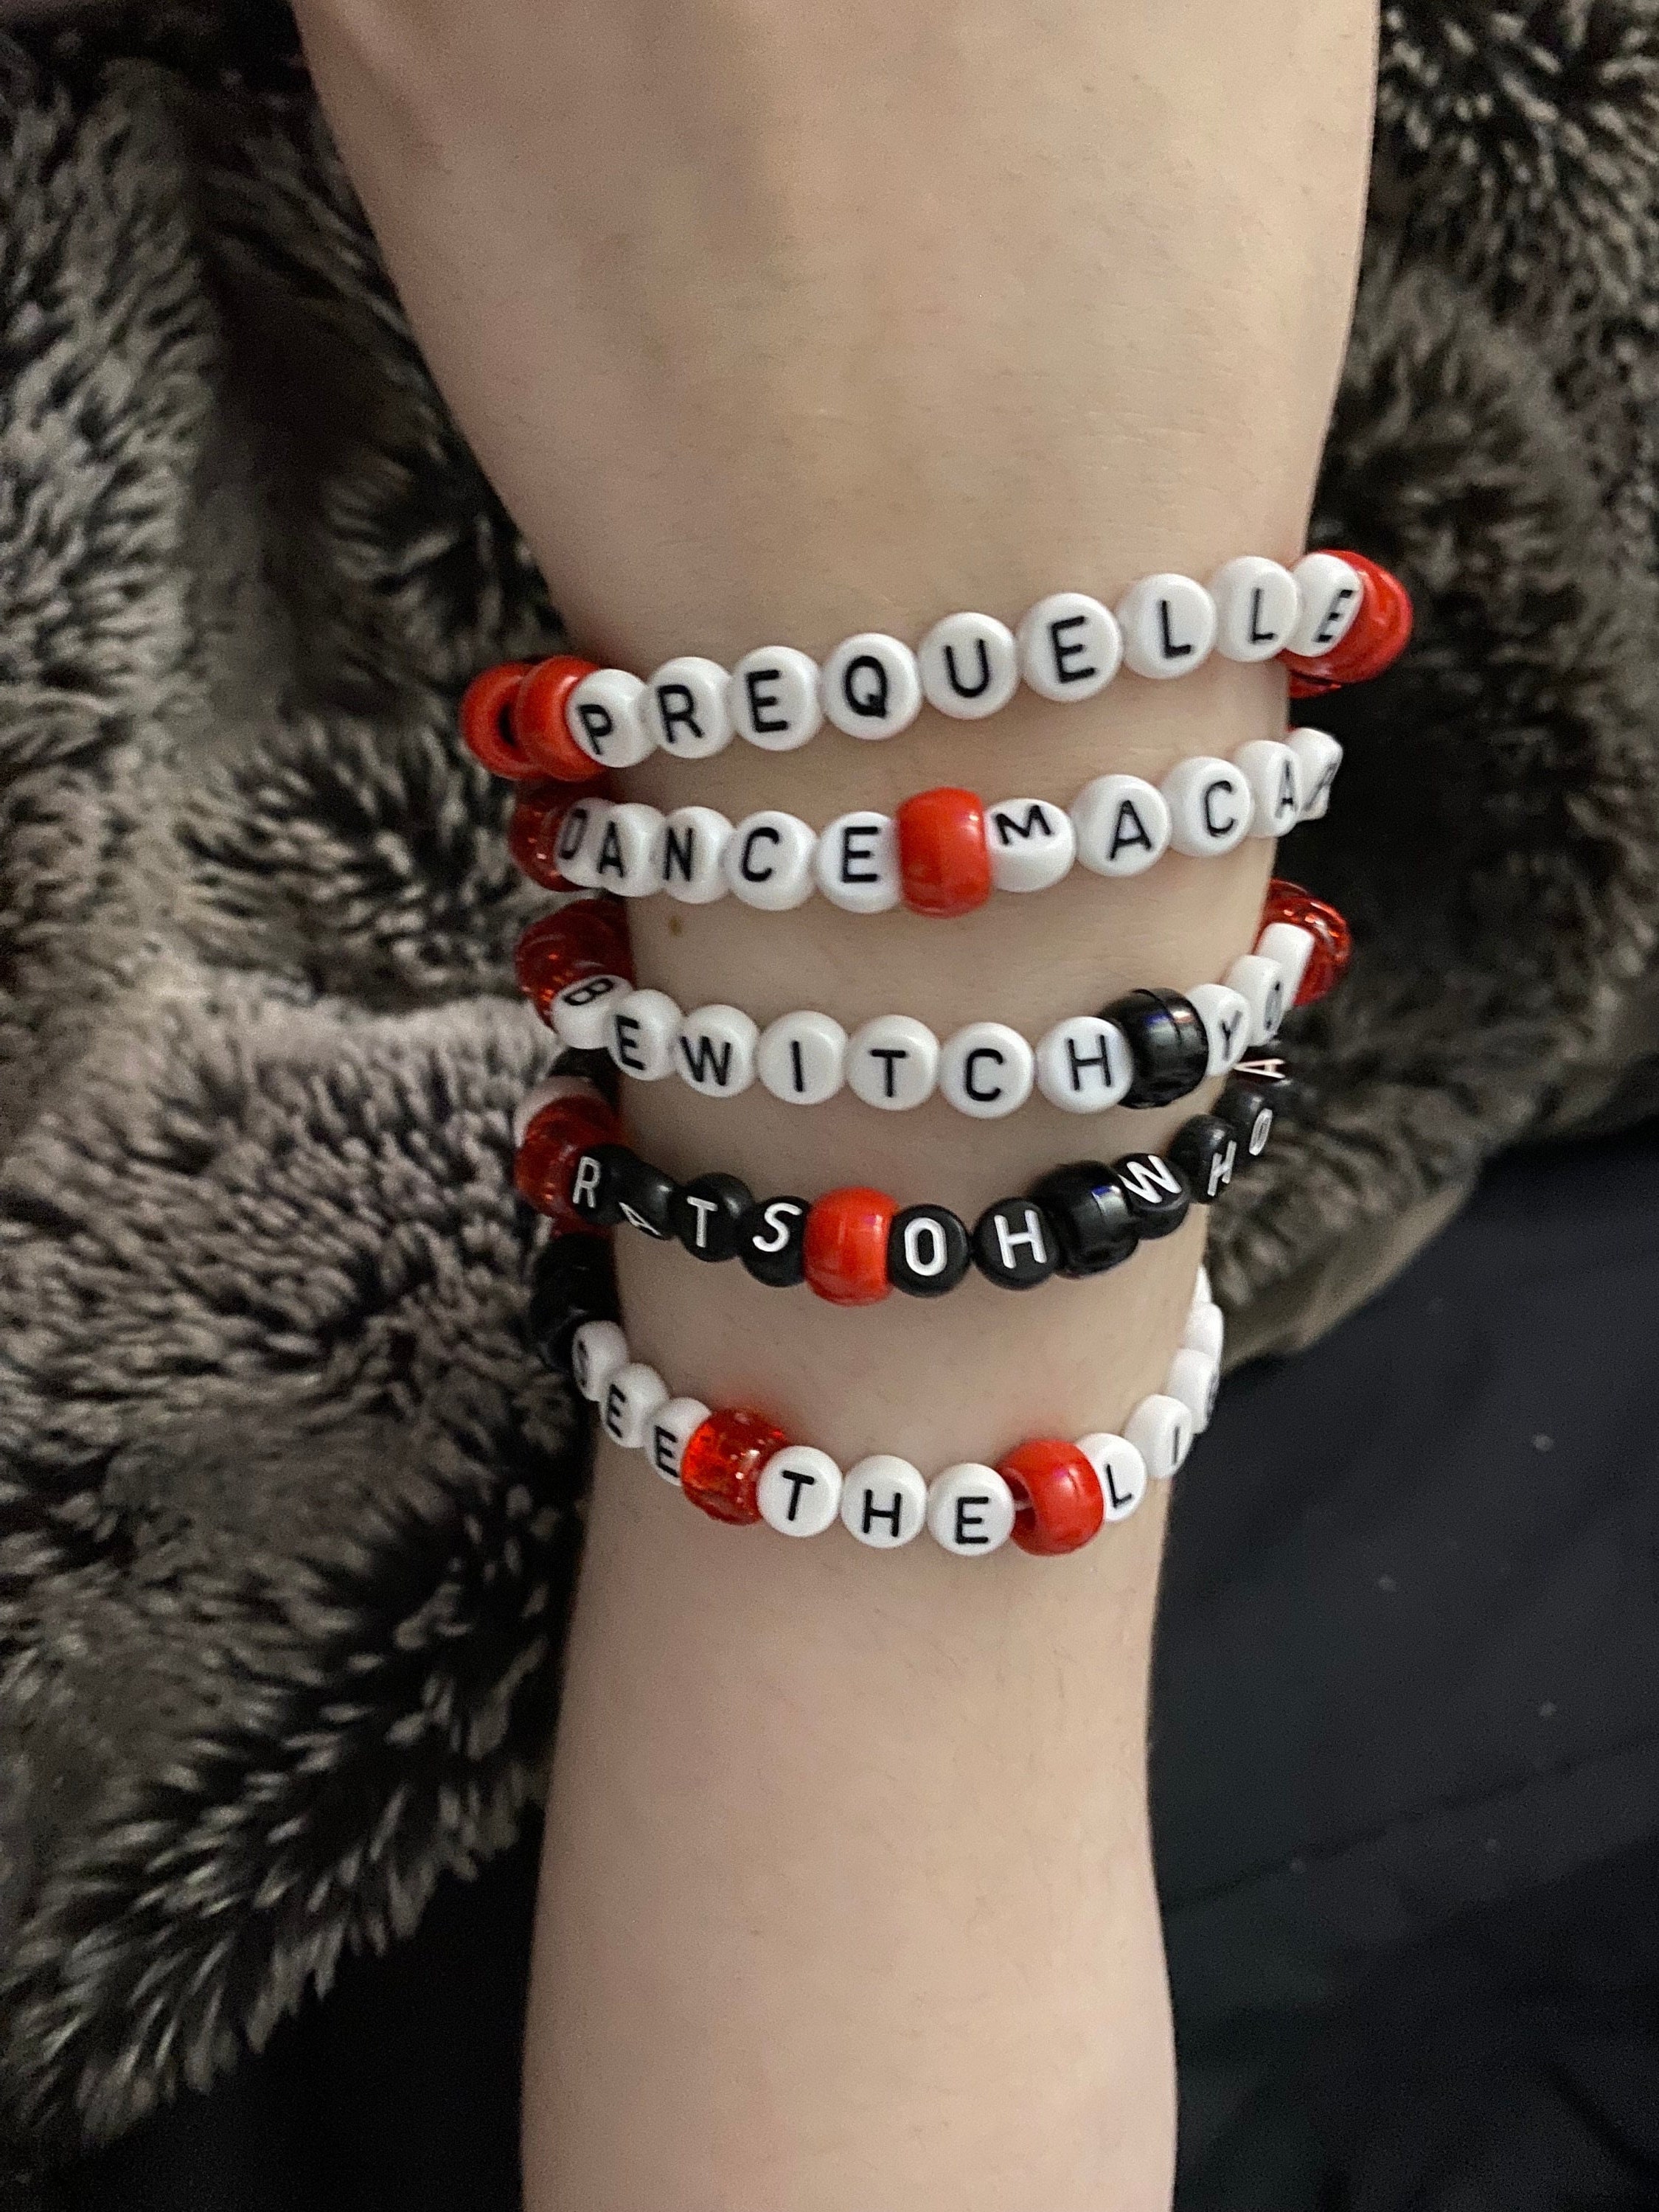 Halloween Ghost Beaded Bracelet. Can Be Personalised with Any Name or Word. Black and White with Stainless Steel Beads and Ghost Charm.